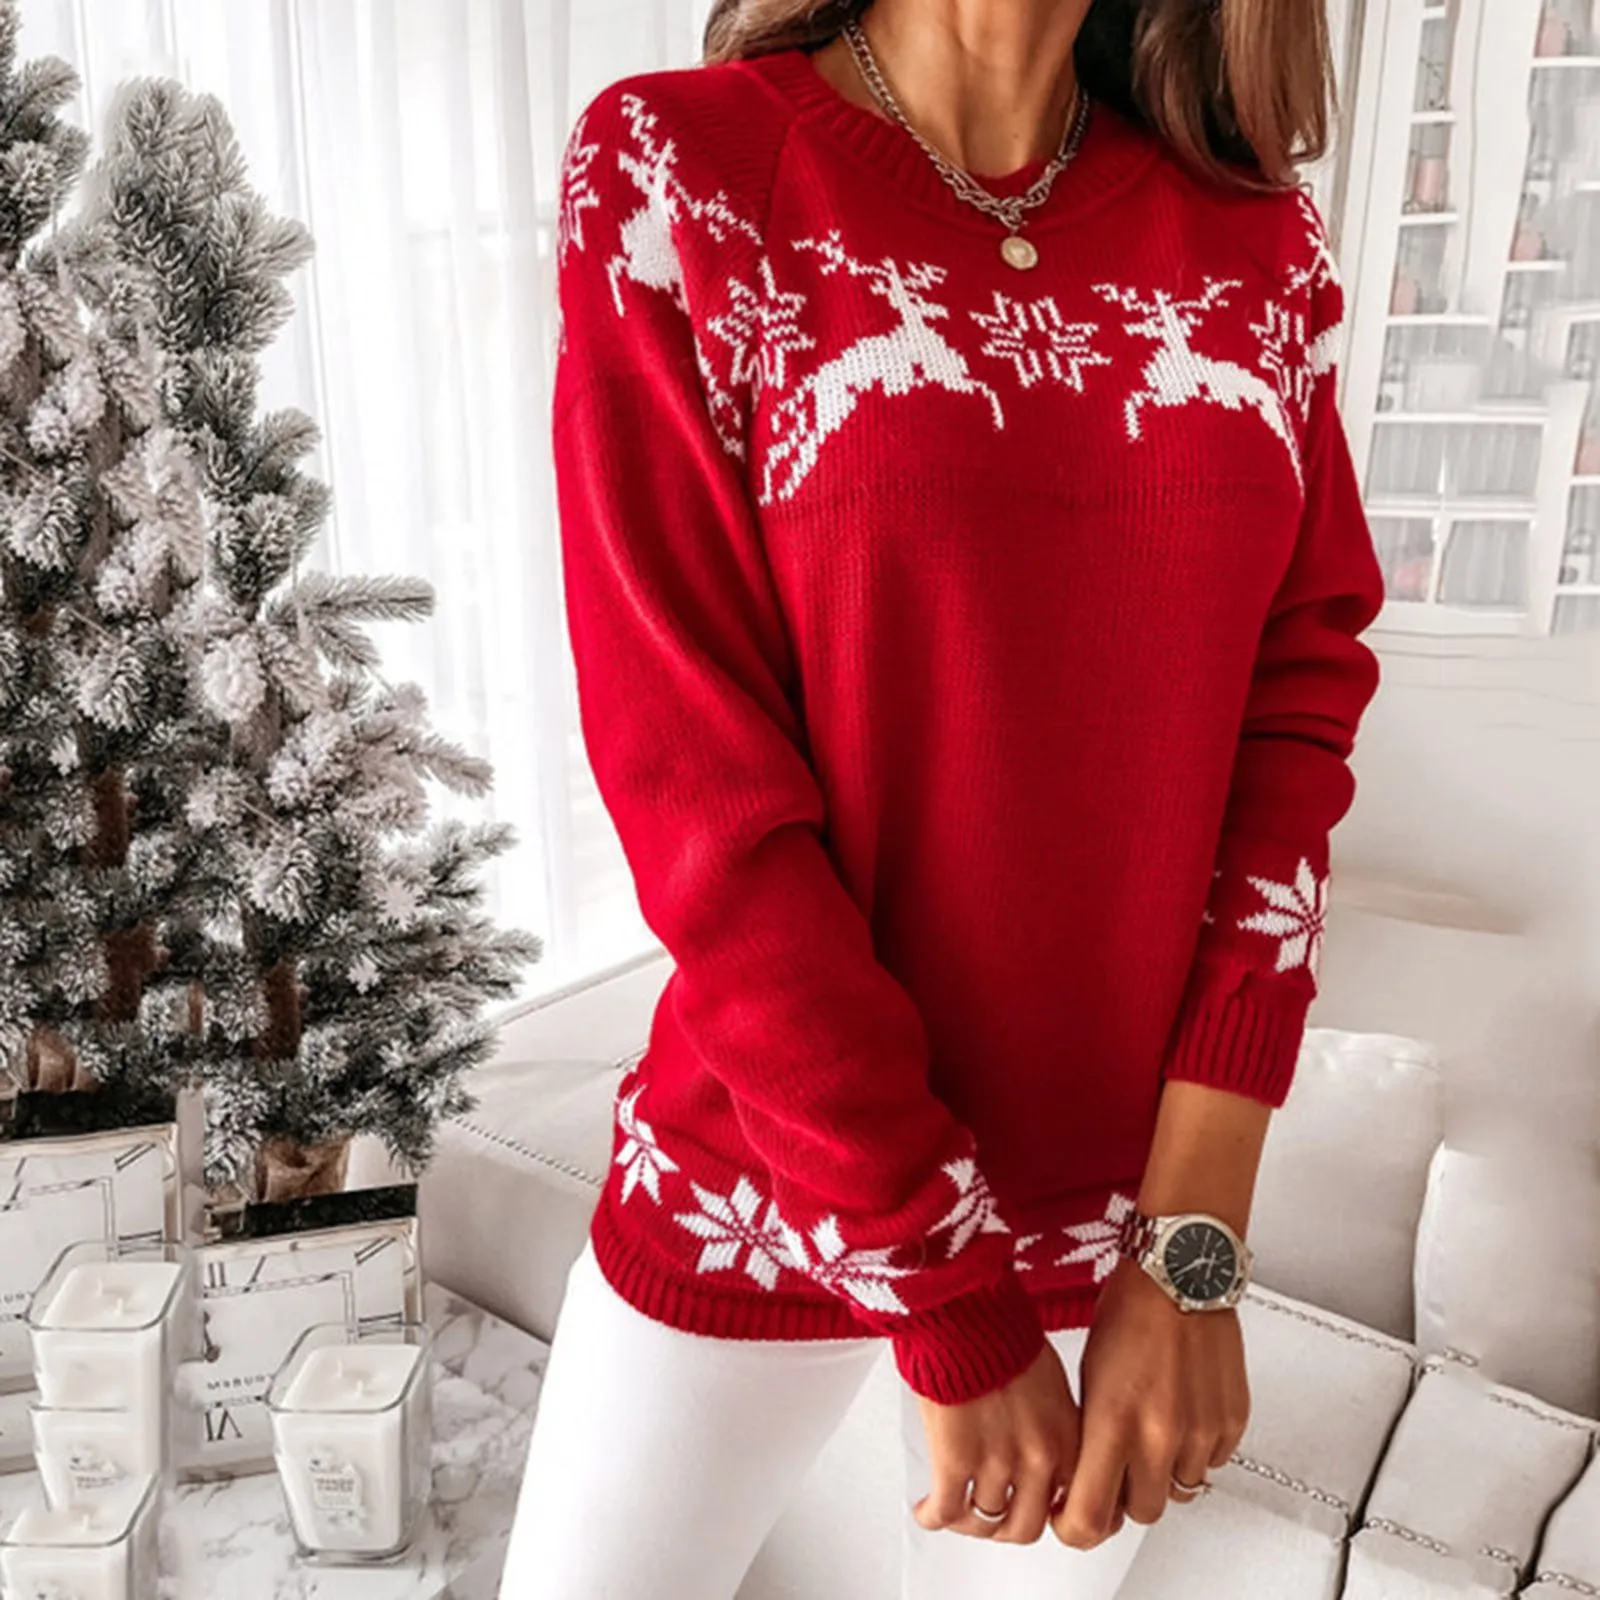 

Christmas Women's Sweater Autumn Winter Tops O Neck Elk Snowflake Xmas Pullover Sweater Knit Tops Blouse Women Jumper Sweater